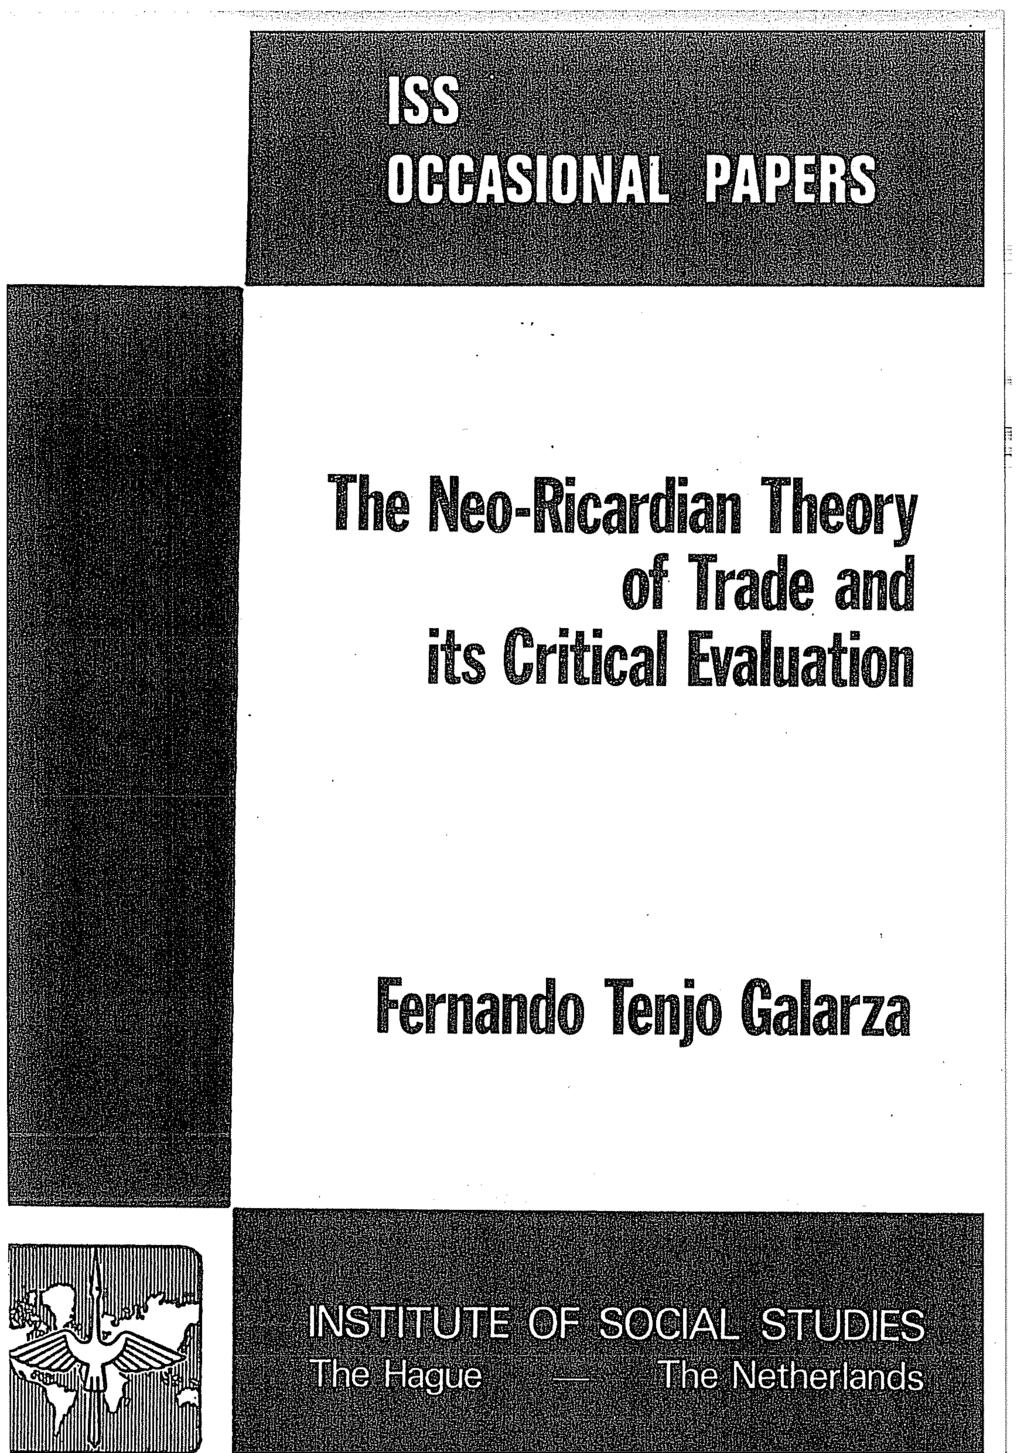 The Neo-Ricardian Theory of Trade and its